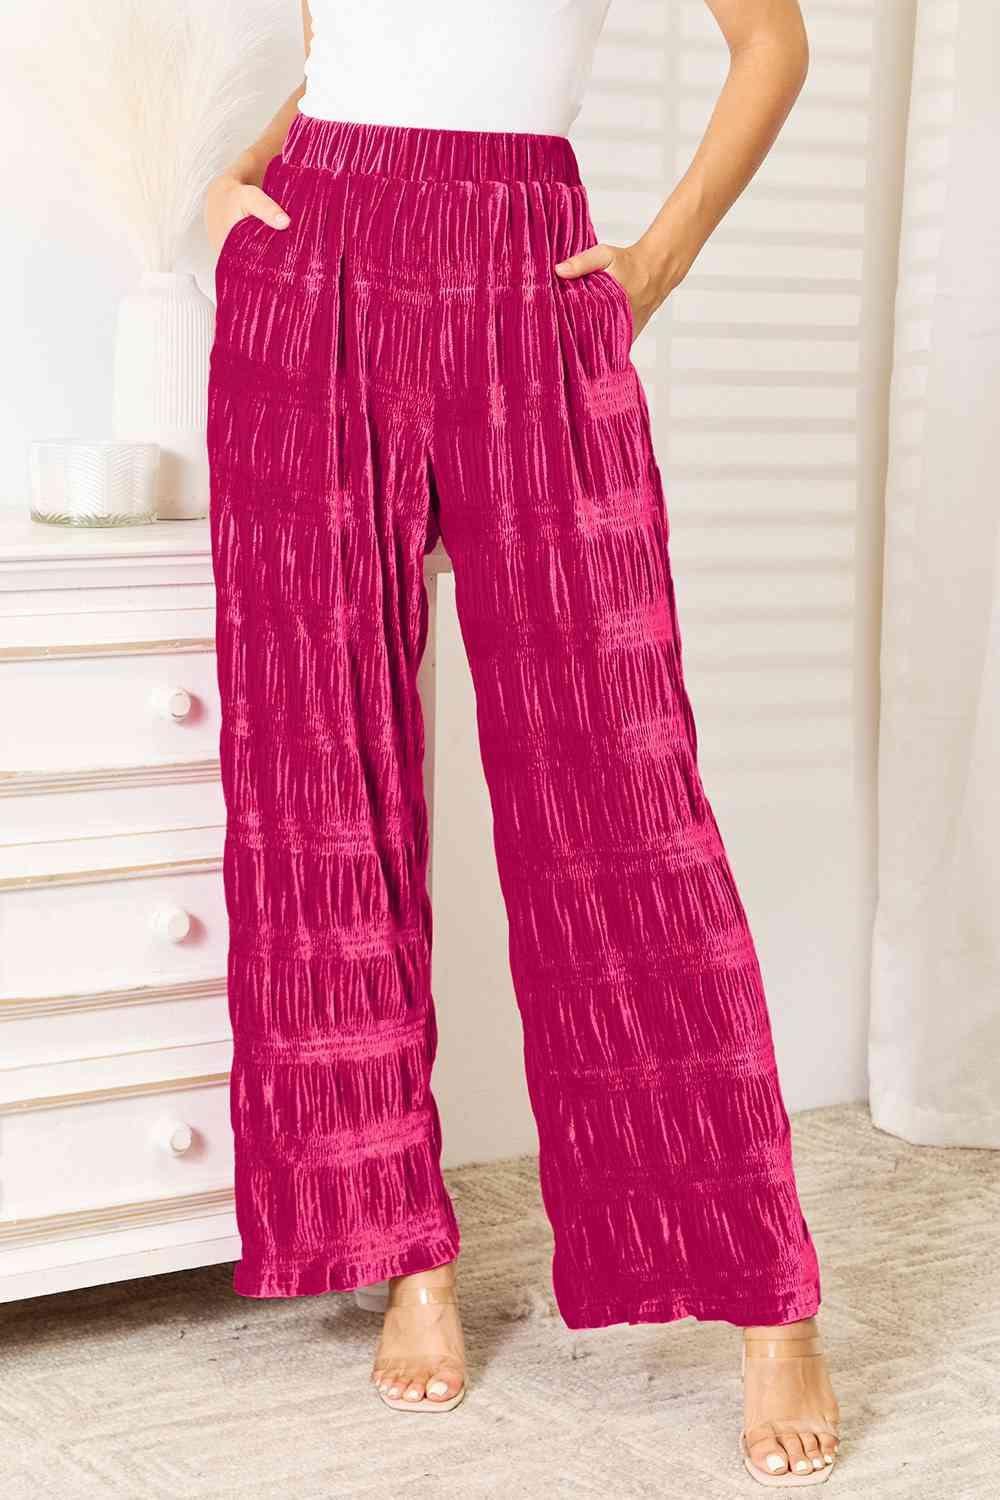 Fashion Forward: Wide Leg Velvet Pants with Tiered Detail